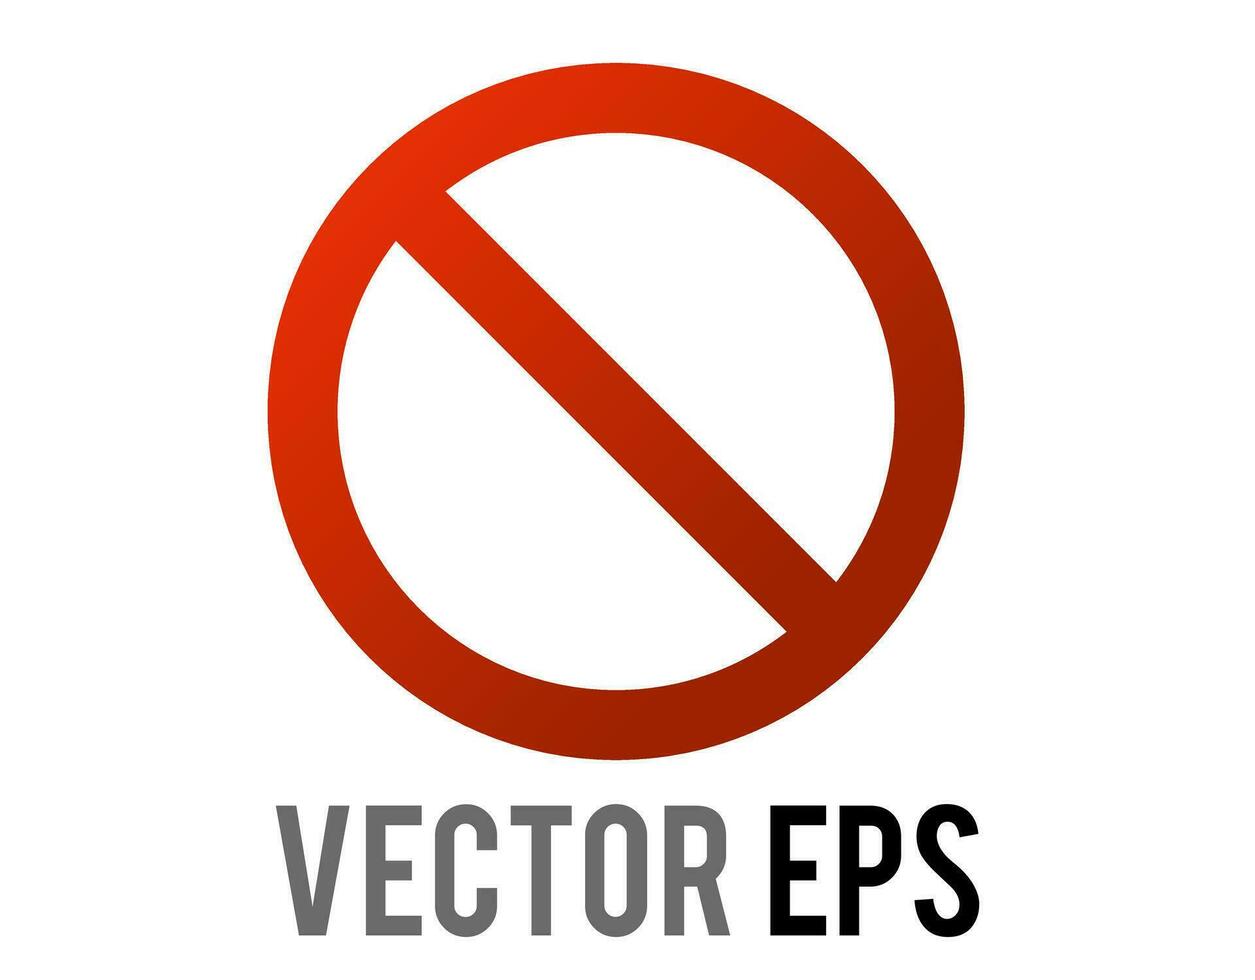 Vector red circle with a diagonal line prohibited sign icon, used to not permitted